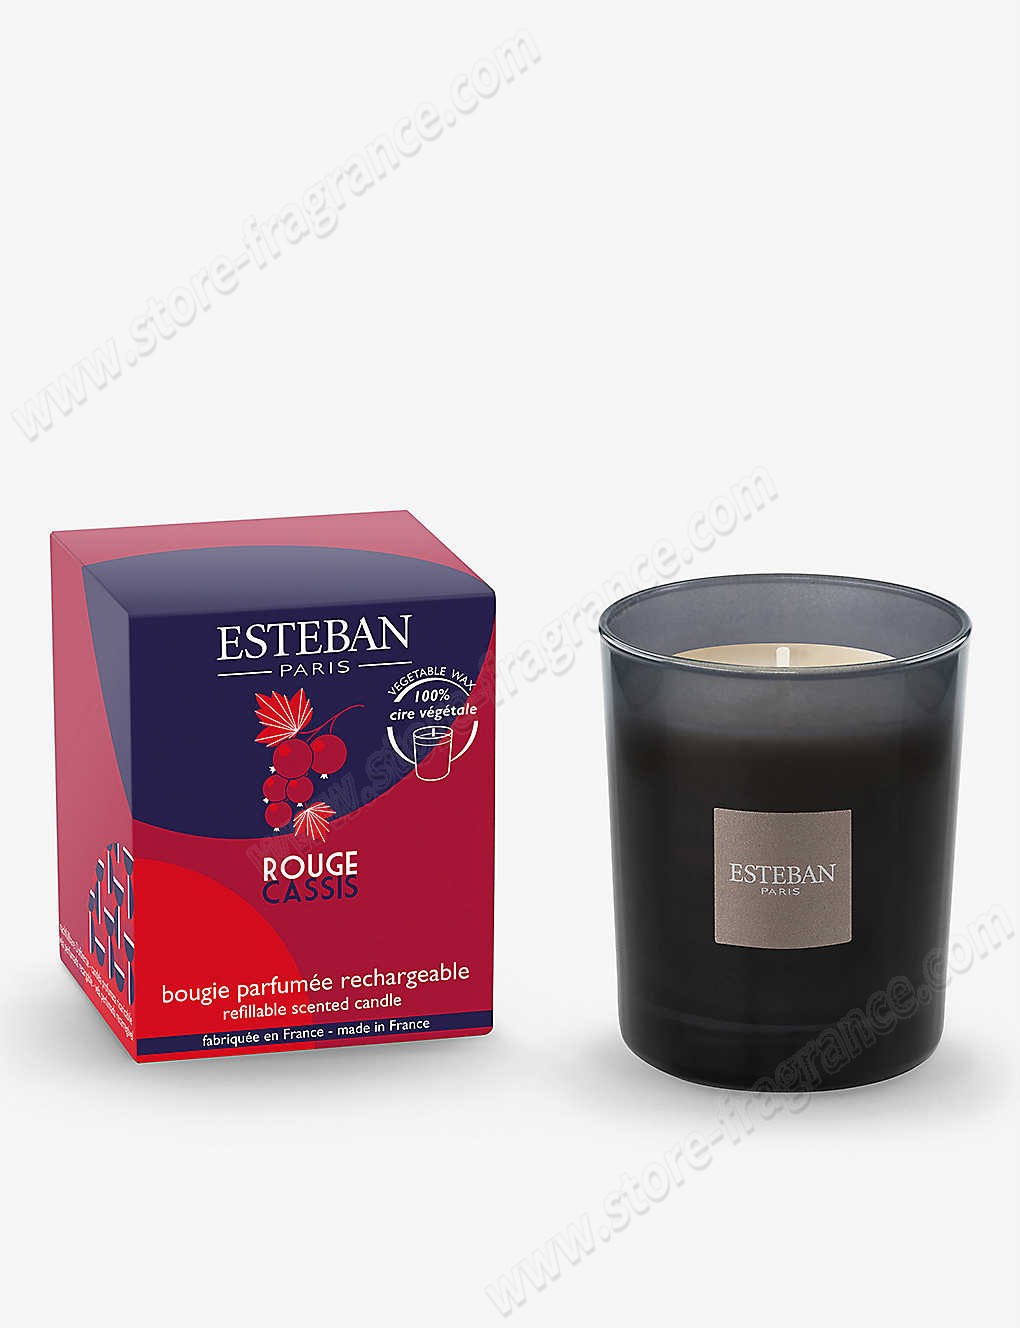 ESTEBAN/Rouge Cassis scented candle 170g ✿ Discount Store - ESTEBAN/Rouge Cassis scented candle 170g ✿ Discount Store